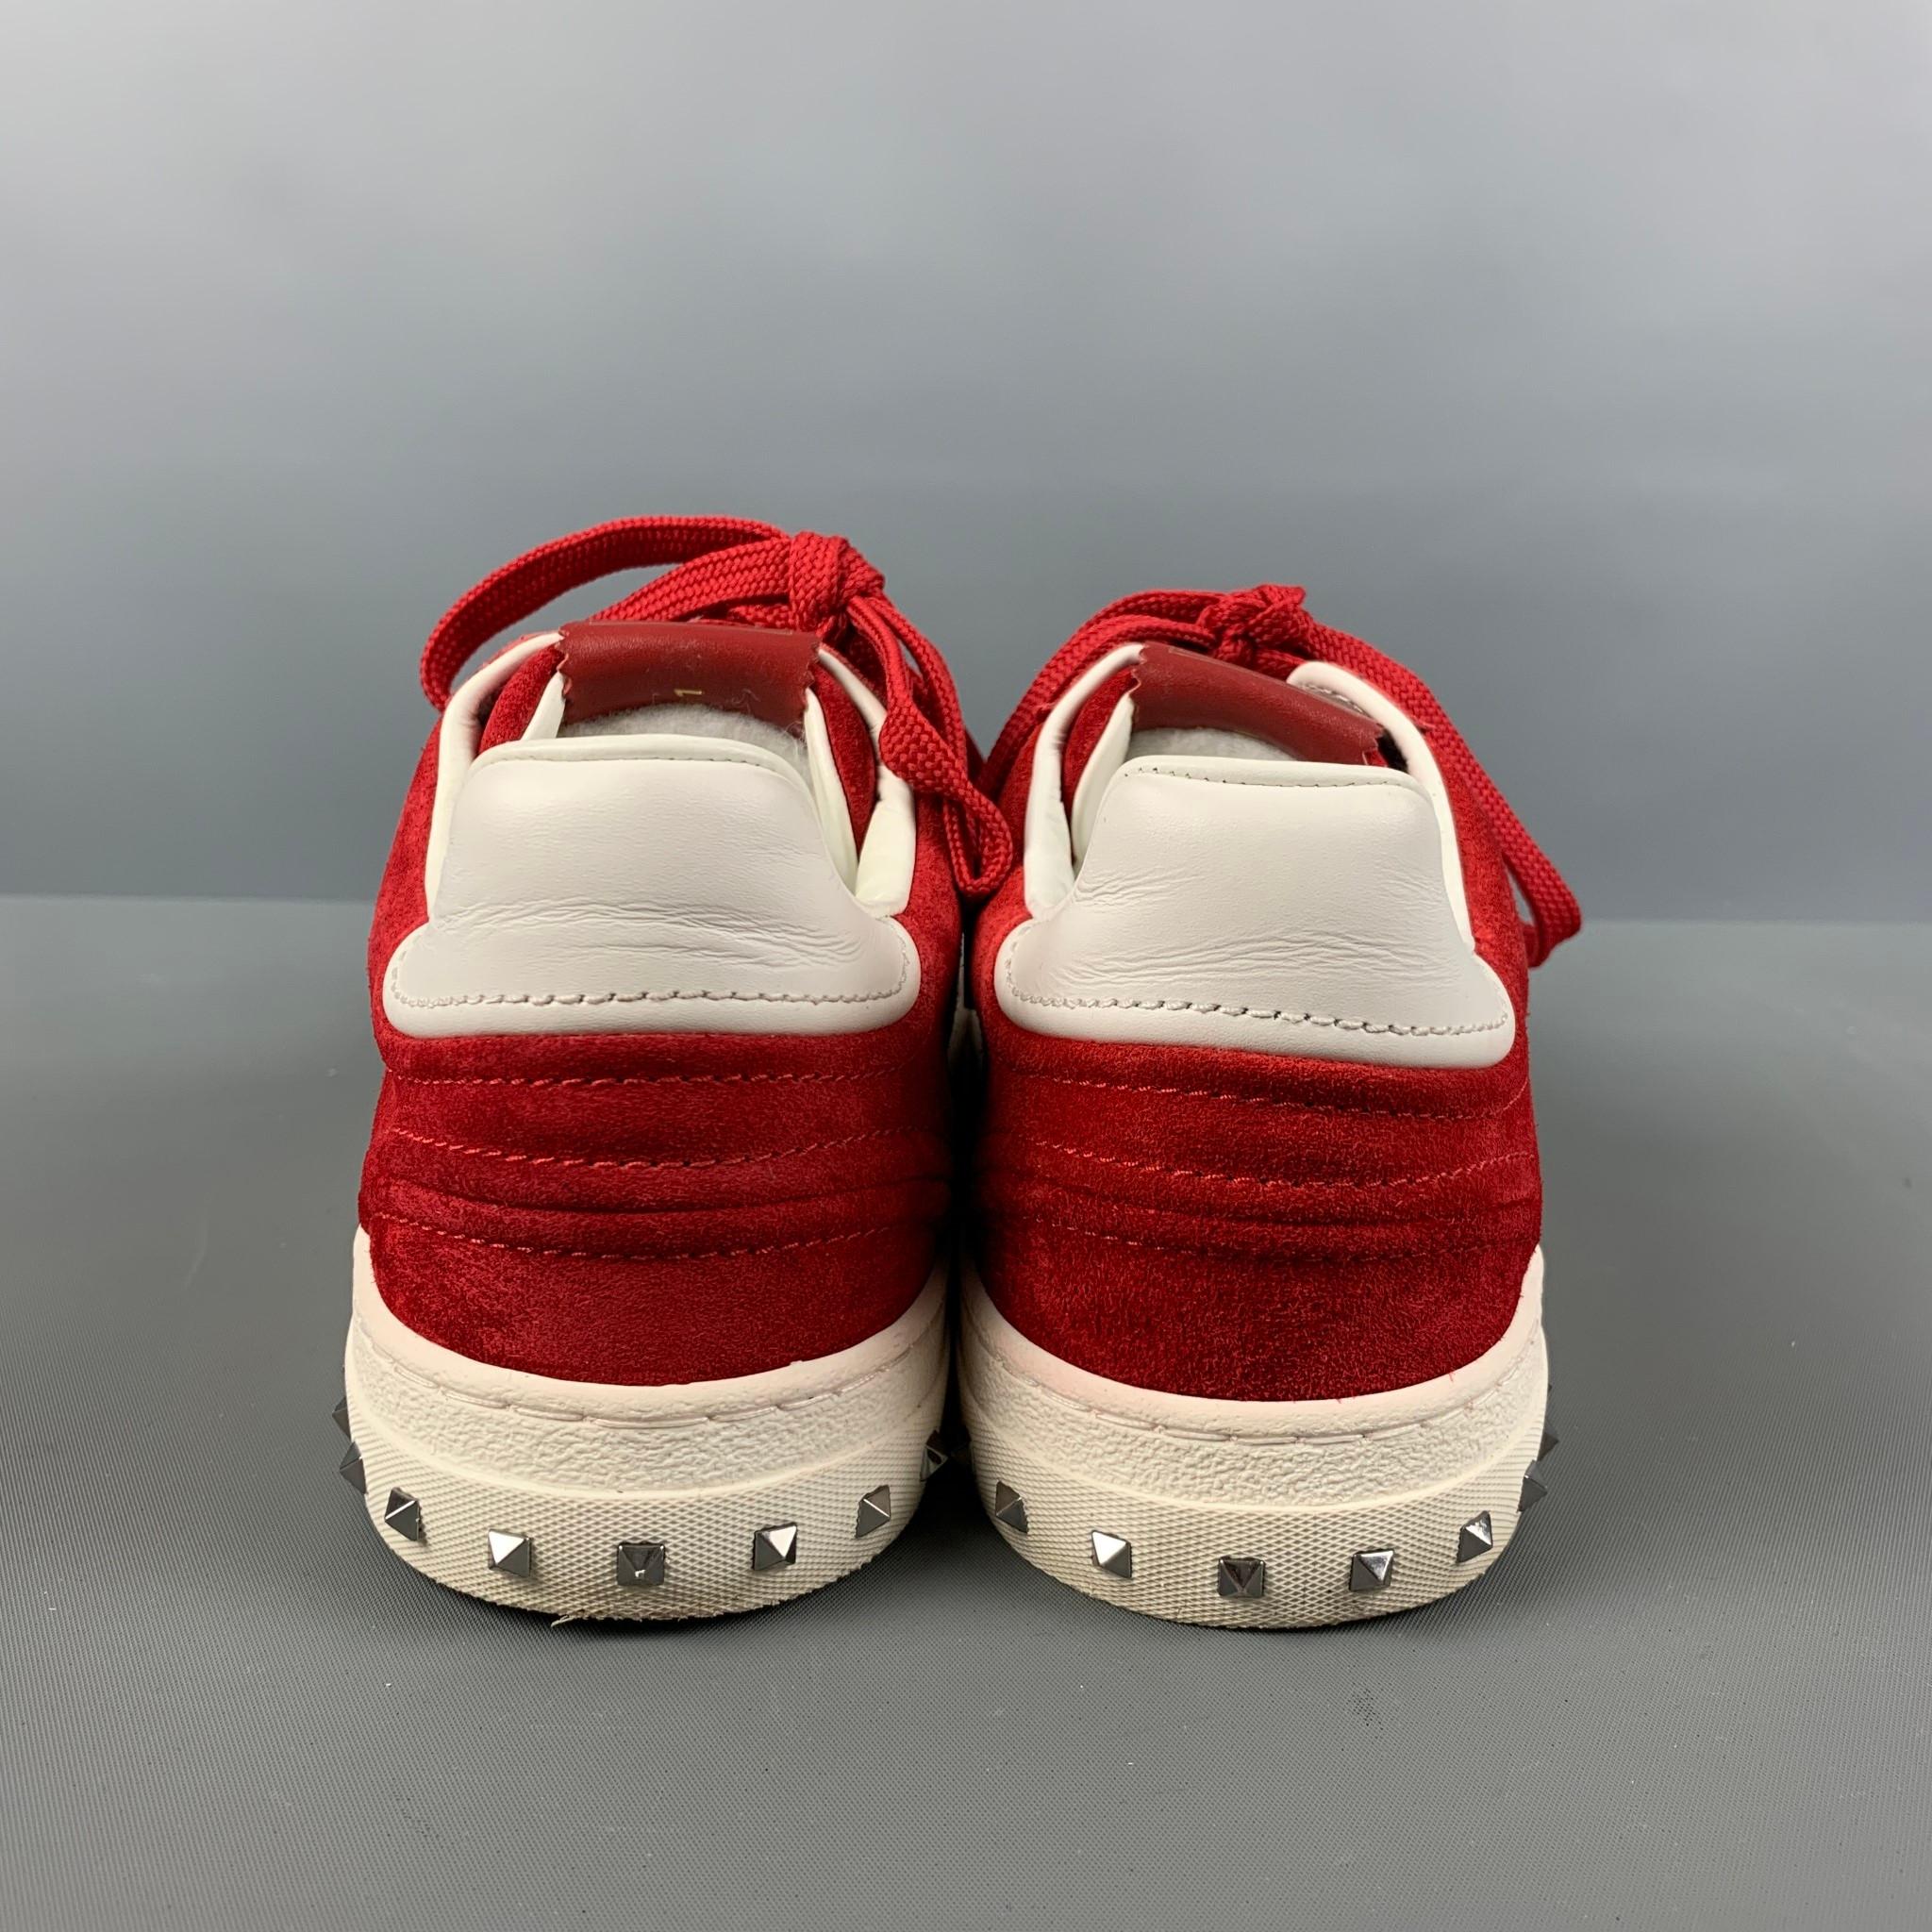 VALENTINO 'City Planet Rockstud' Size 8 Red White Studded Suede Sneakers In Good Condition In San Francisco, CA